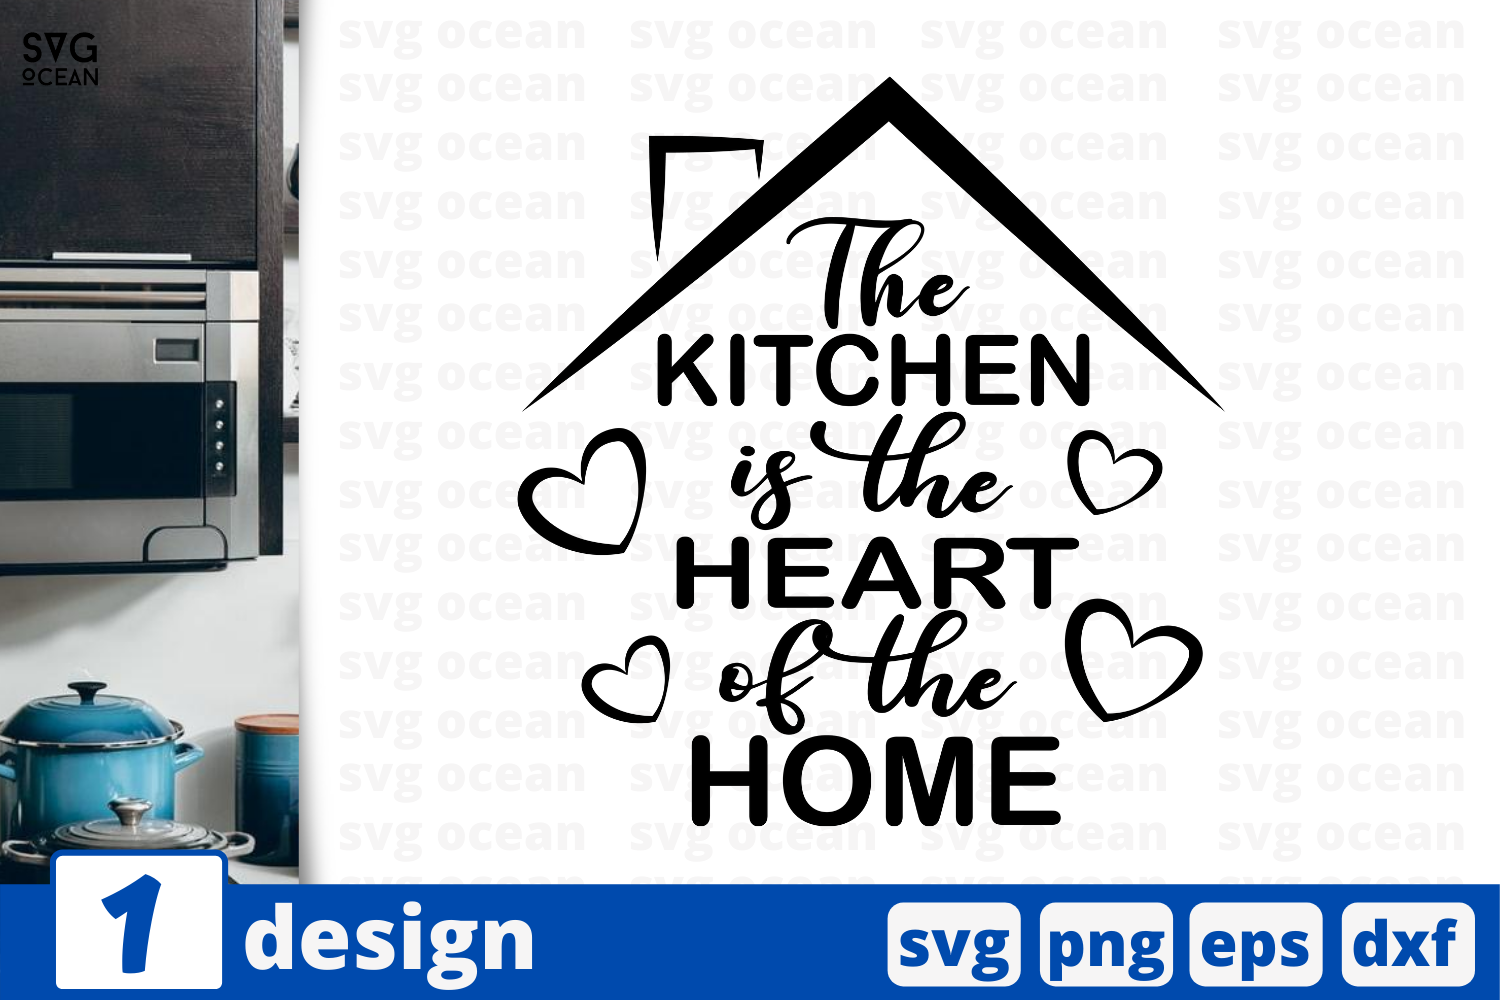 Download 1 The kitchen is the heart of the home, Kitchen quotes cricut svg By SvgOcean | TheHungryJPEG.com